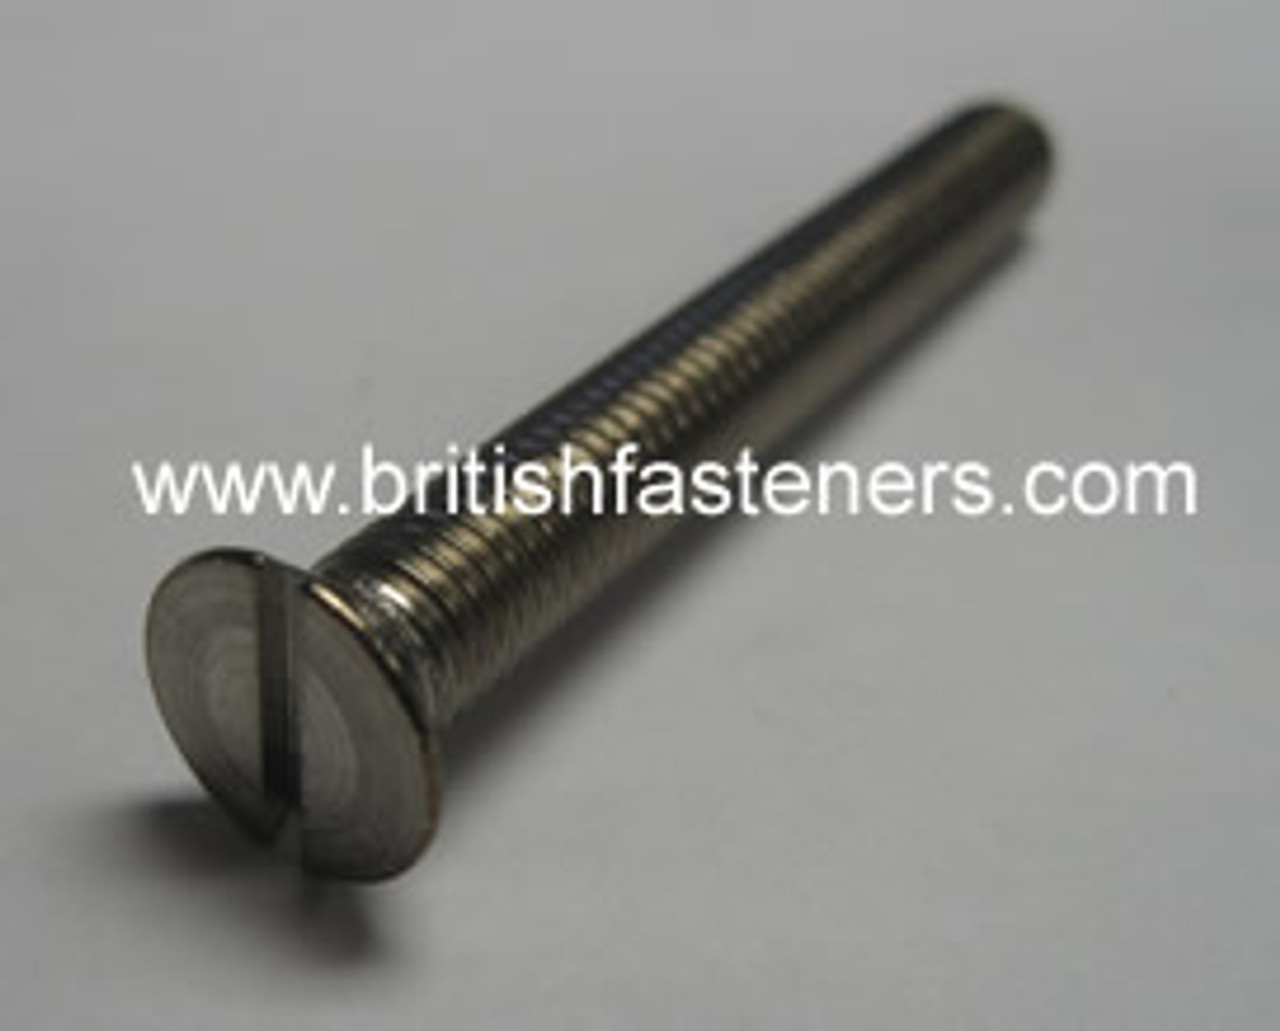 BSW 1/4" - 20  x 2-1/2" SLOTTED C/SUNK SCREW S/S